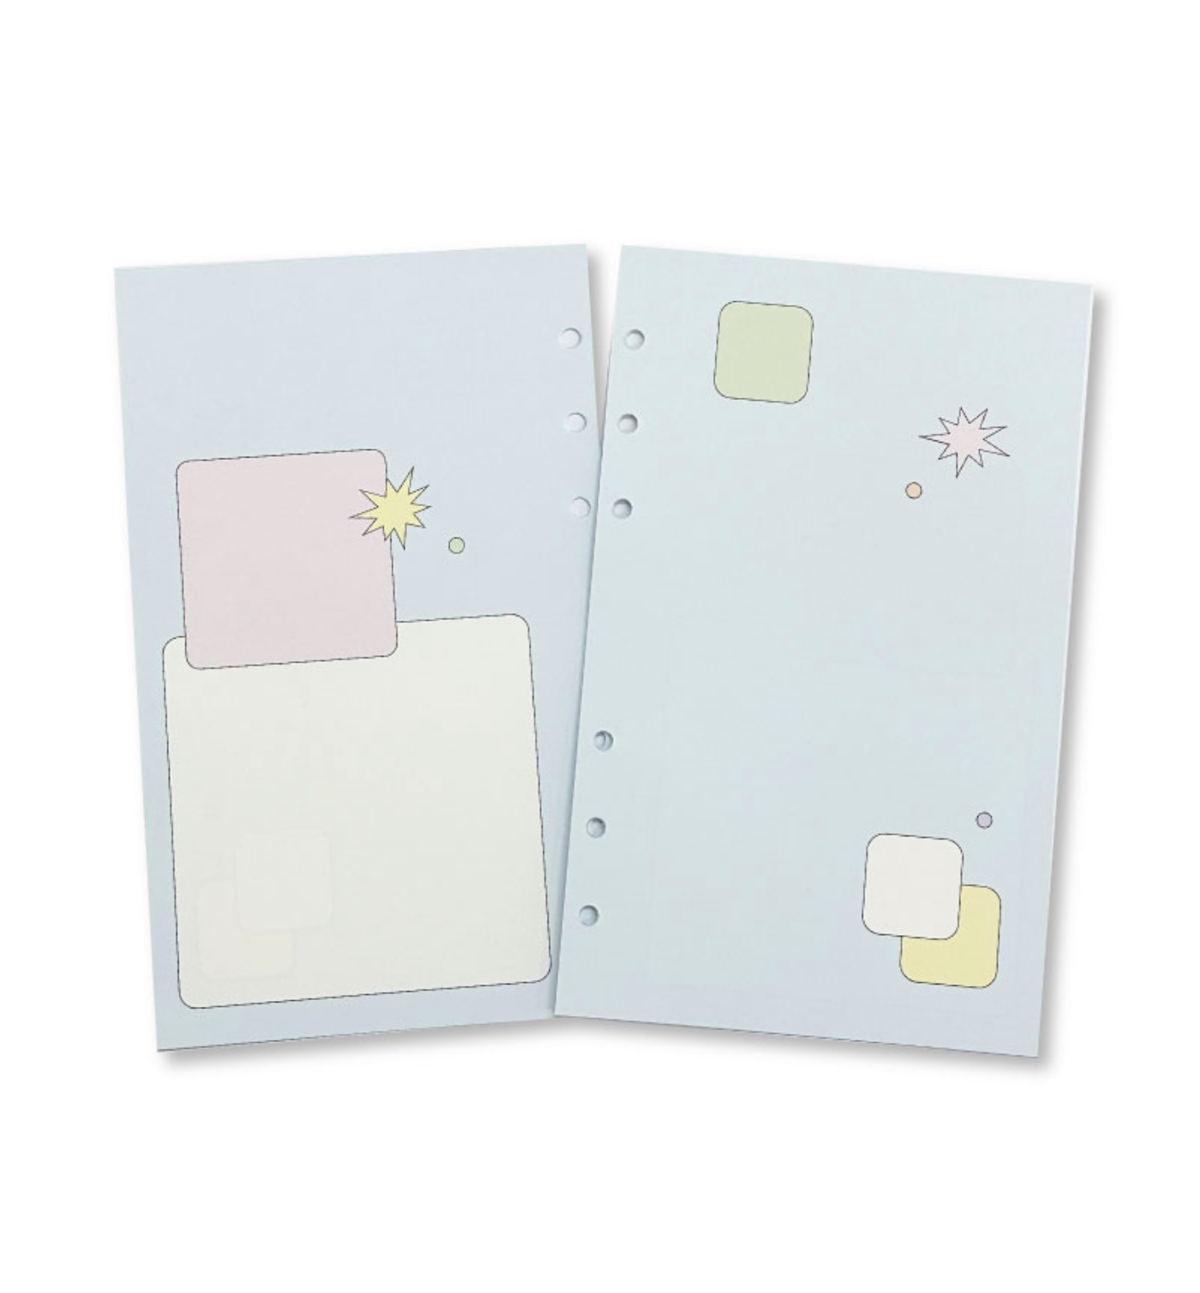 A6 Salty Free Note Paper Refill